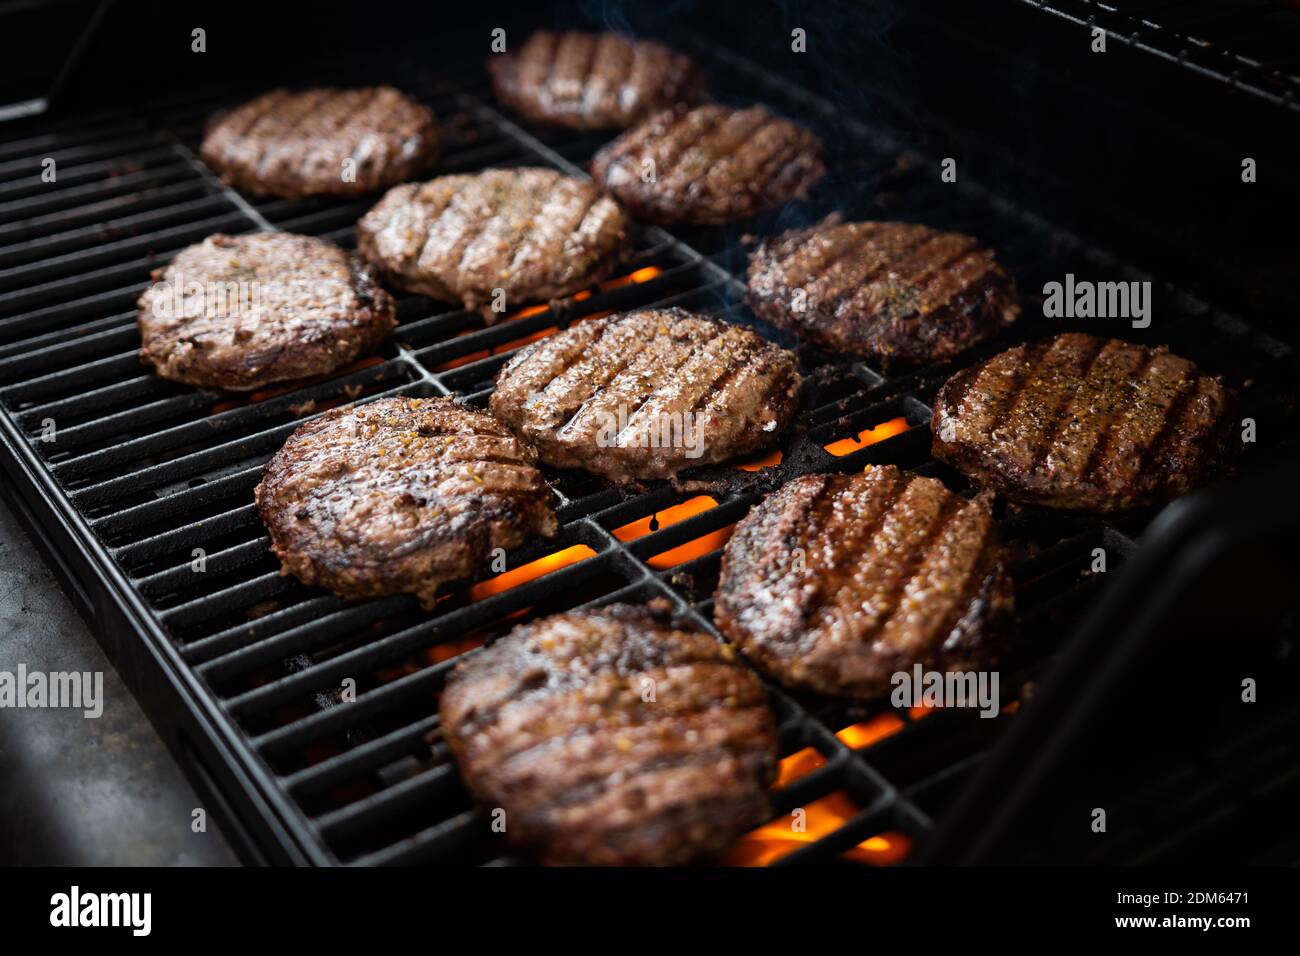 Hamburgers and hot dogs cook on flame charred backyard grill Stock ...